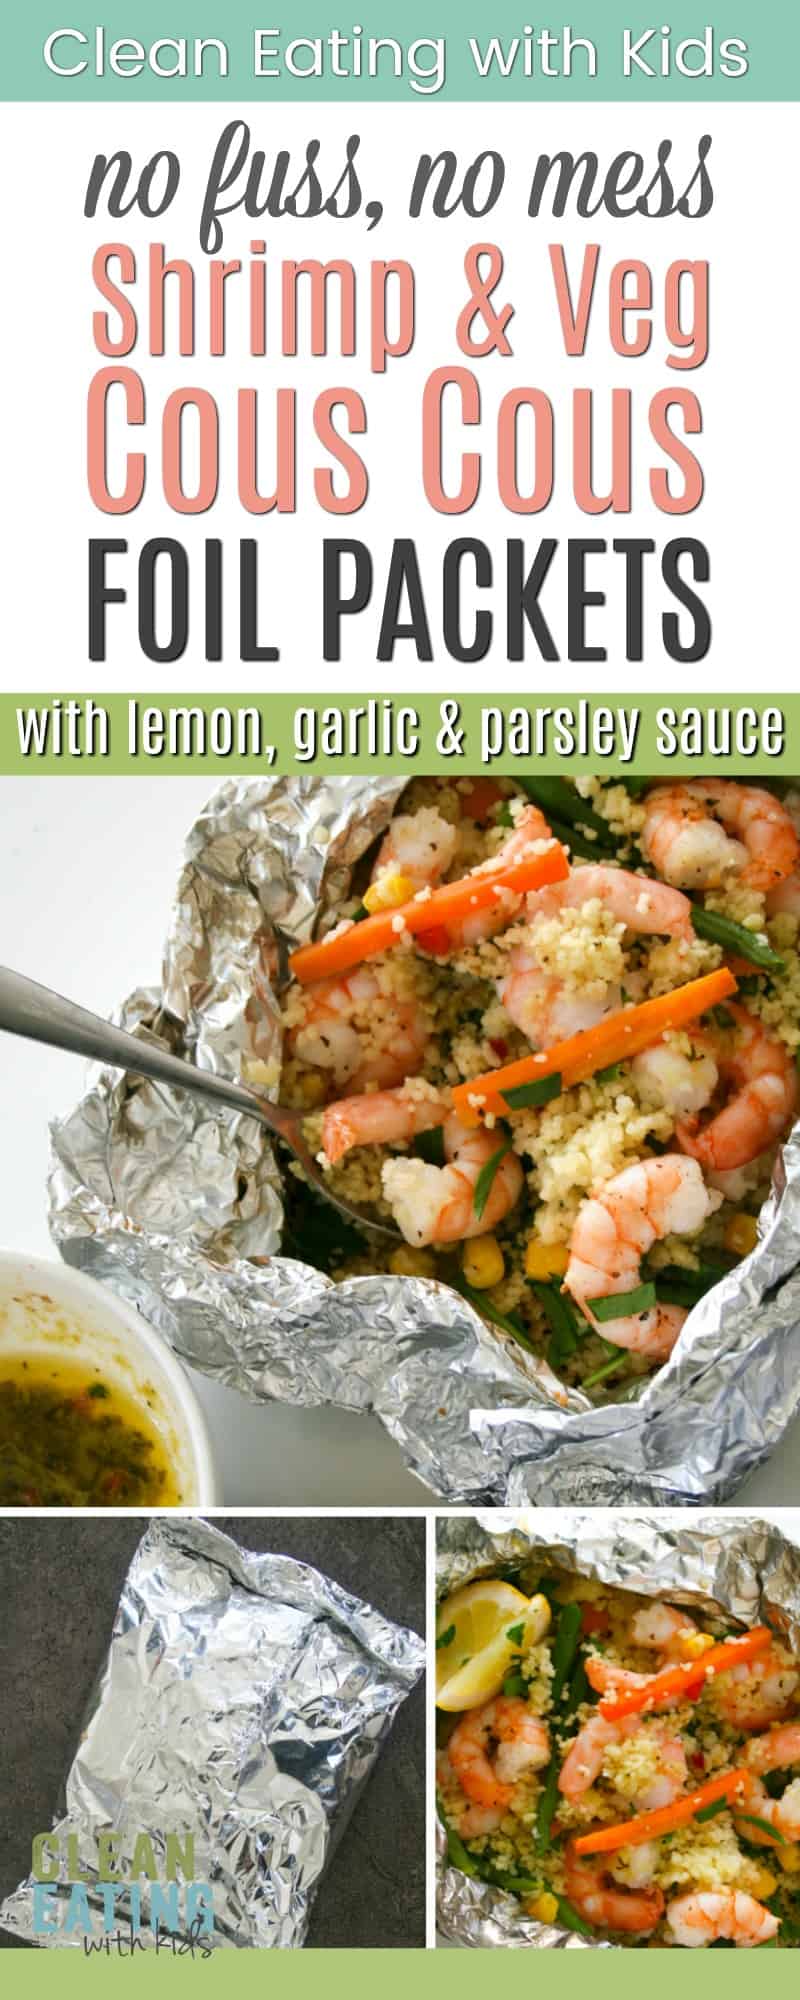 I'm obsessed! I made these shrimp and cous cous foil packets on the grill this week and now I can't stop. Foil Packets are officially my favorite way to cook everything! They are super easy, require zero cleanup and well - they just rock! 